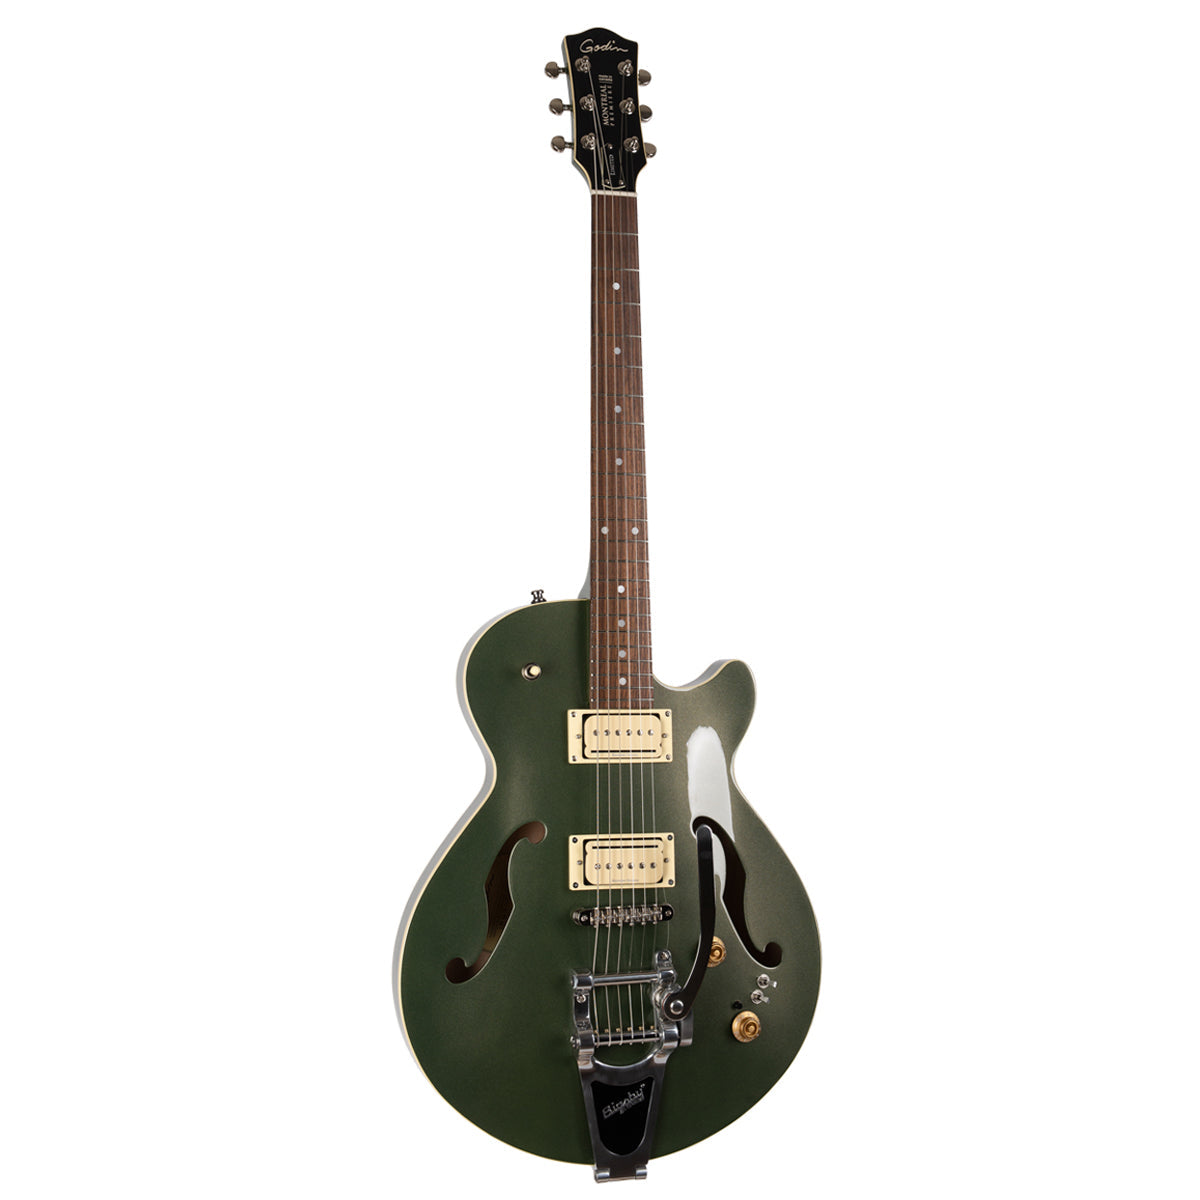 Godin Montreal Premiere LTD Semi-Acoustic Guitar ~ Desert Green with Bigsby and Bag, Electric Guitar for sale at Richards Guitars.